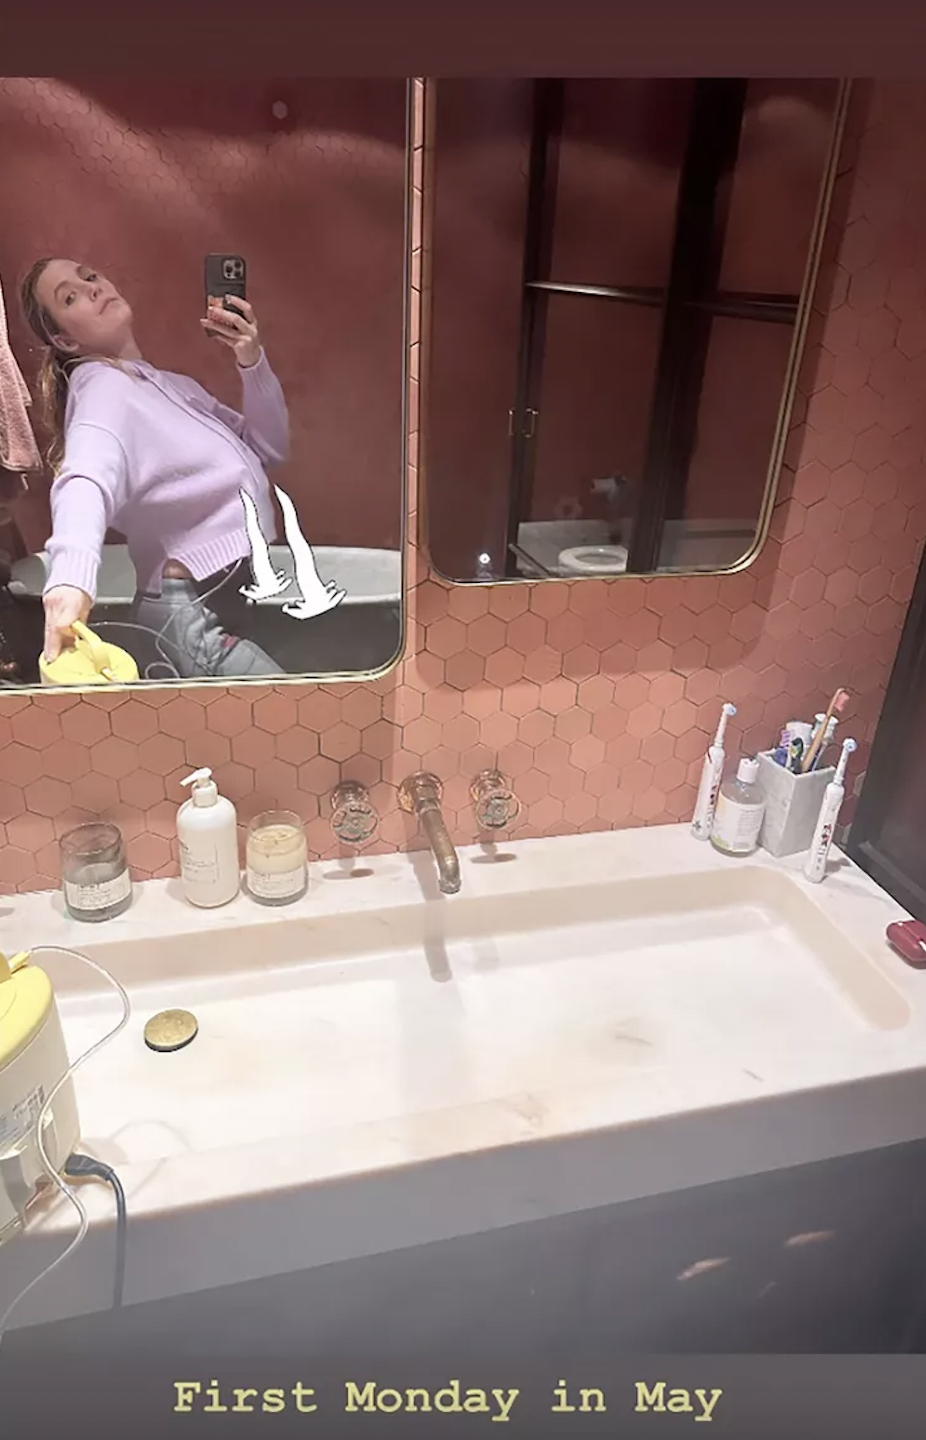 a person taking a selfie in the bathroom mirror